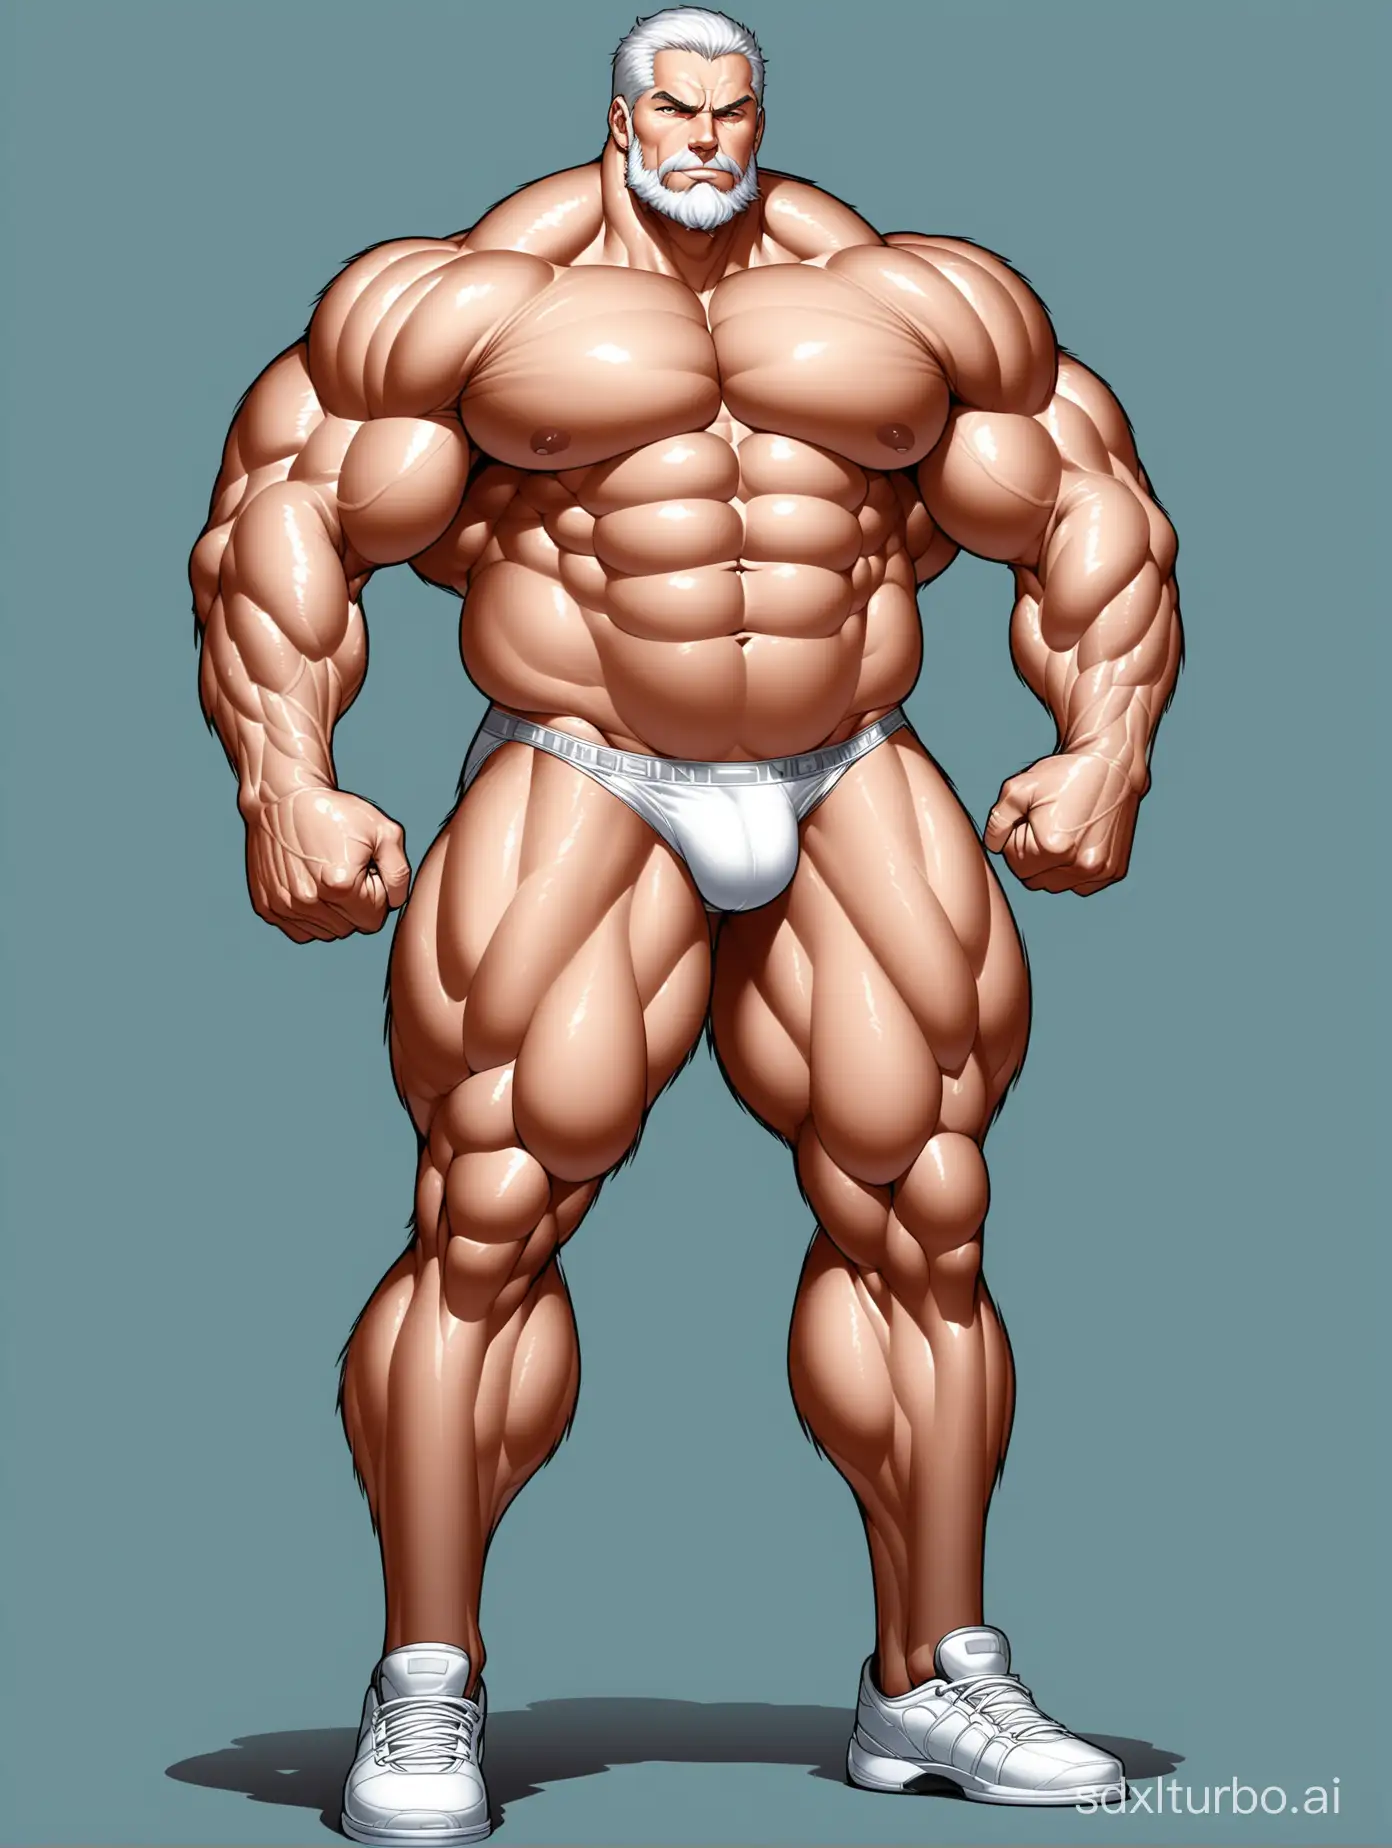 White skin and massive muscle stud, much bodyhair. Huge and giant and Strong body. Very Long and strong legs. 2m tall. very Big Chest. very Big biceps. 8-pack abs. Very Massive muscle Body. Wearing underwear. he is giant tall. very fat. very fat. very fat. Full Body diagram. very long strong legs.very long legs.very long legs. raise his arms to show his huge biceps. wearing white shoes. raise his arms to show his huge biceps.very old man.very handsome men.big cock.